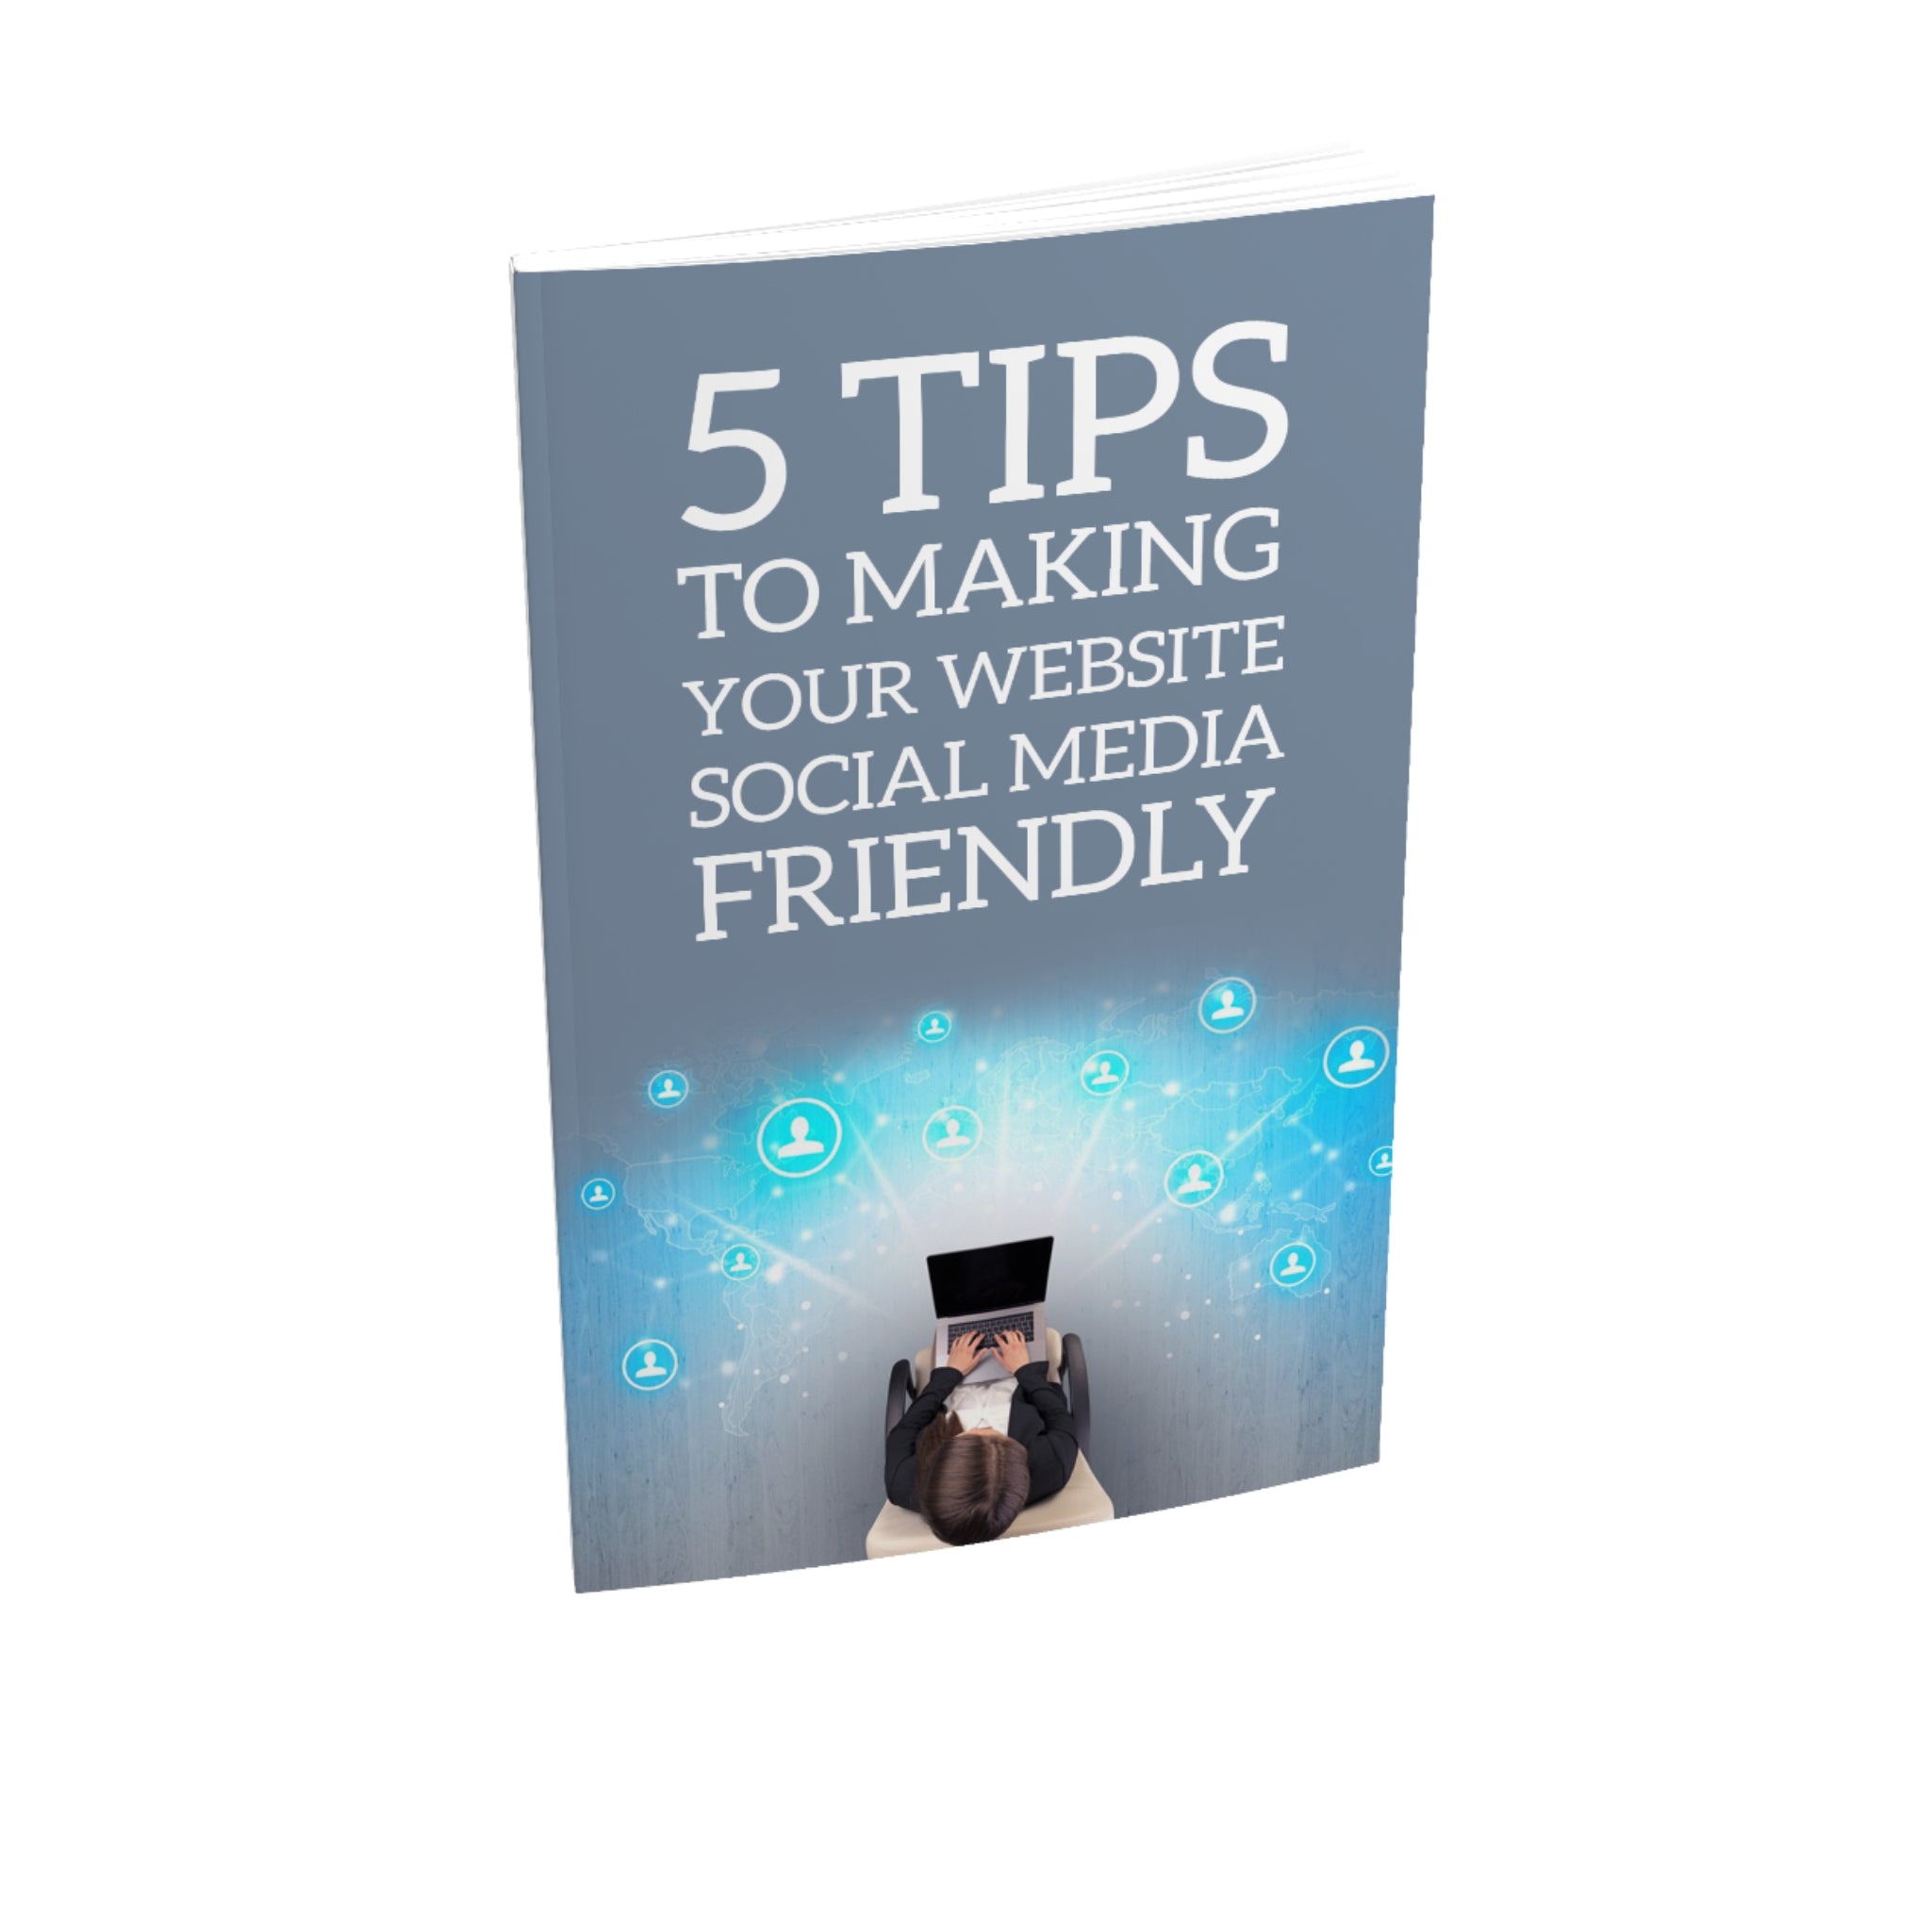 5 Tips To Making Your Website Social Media Friendly Ebook